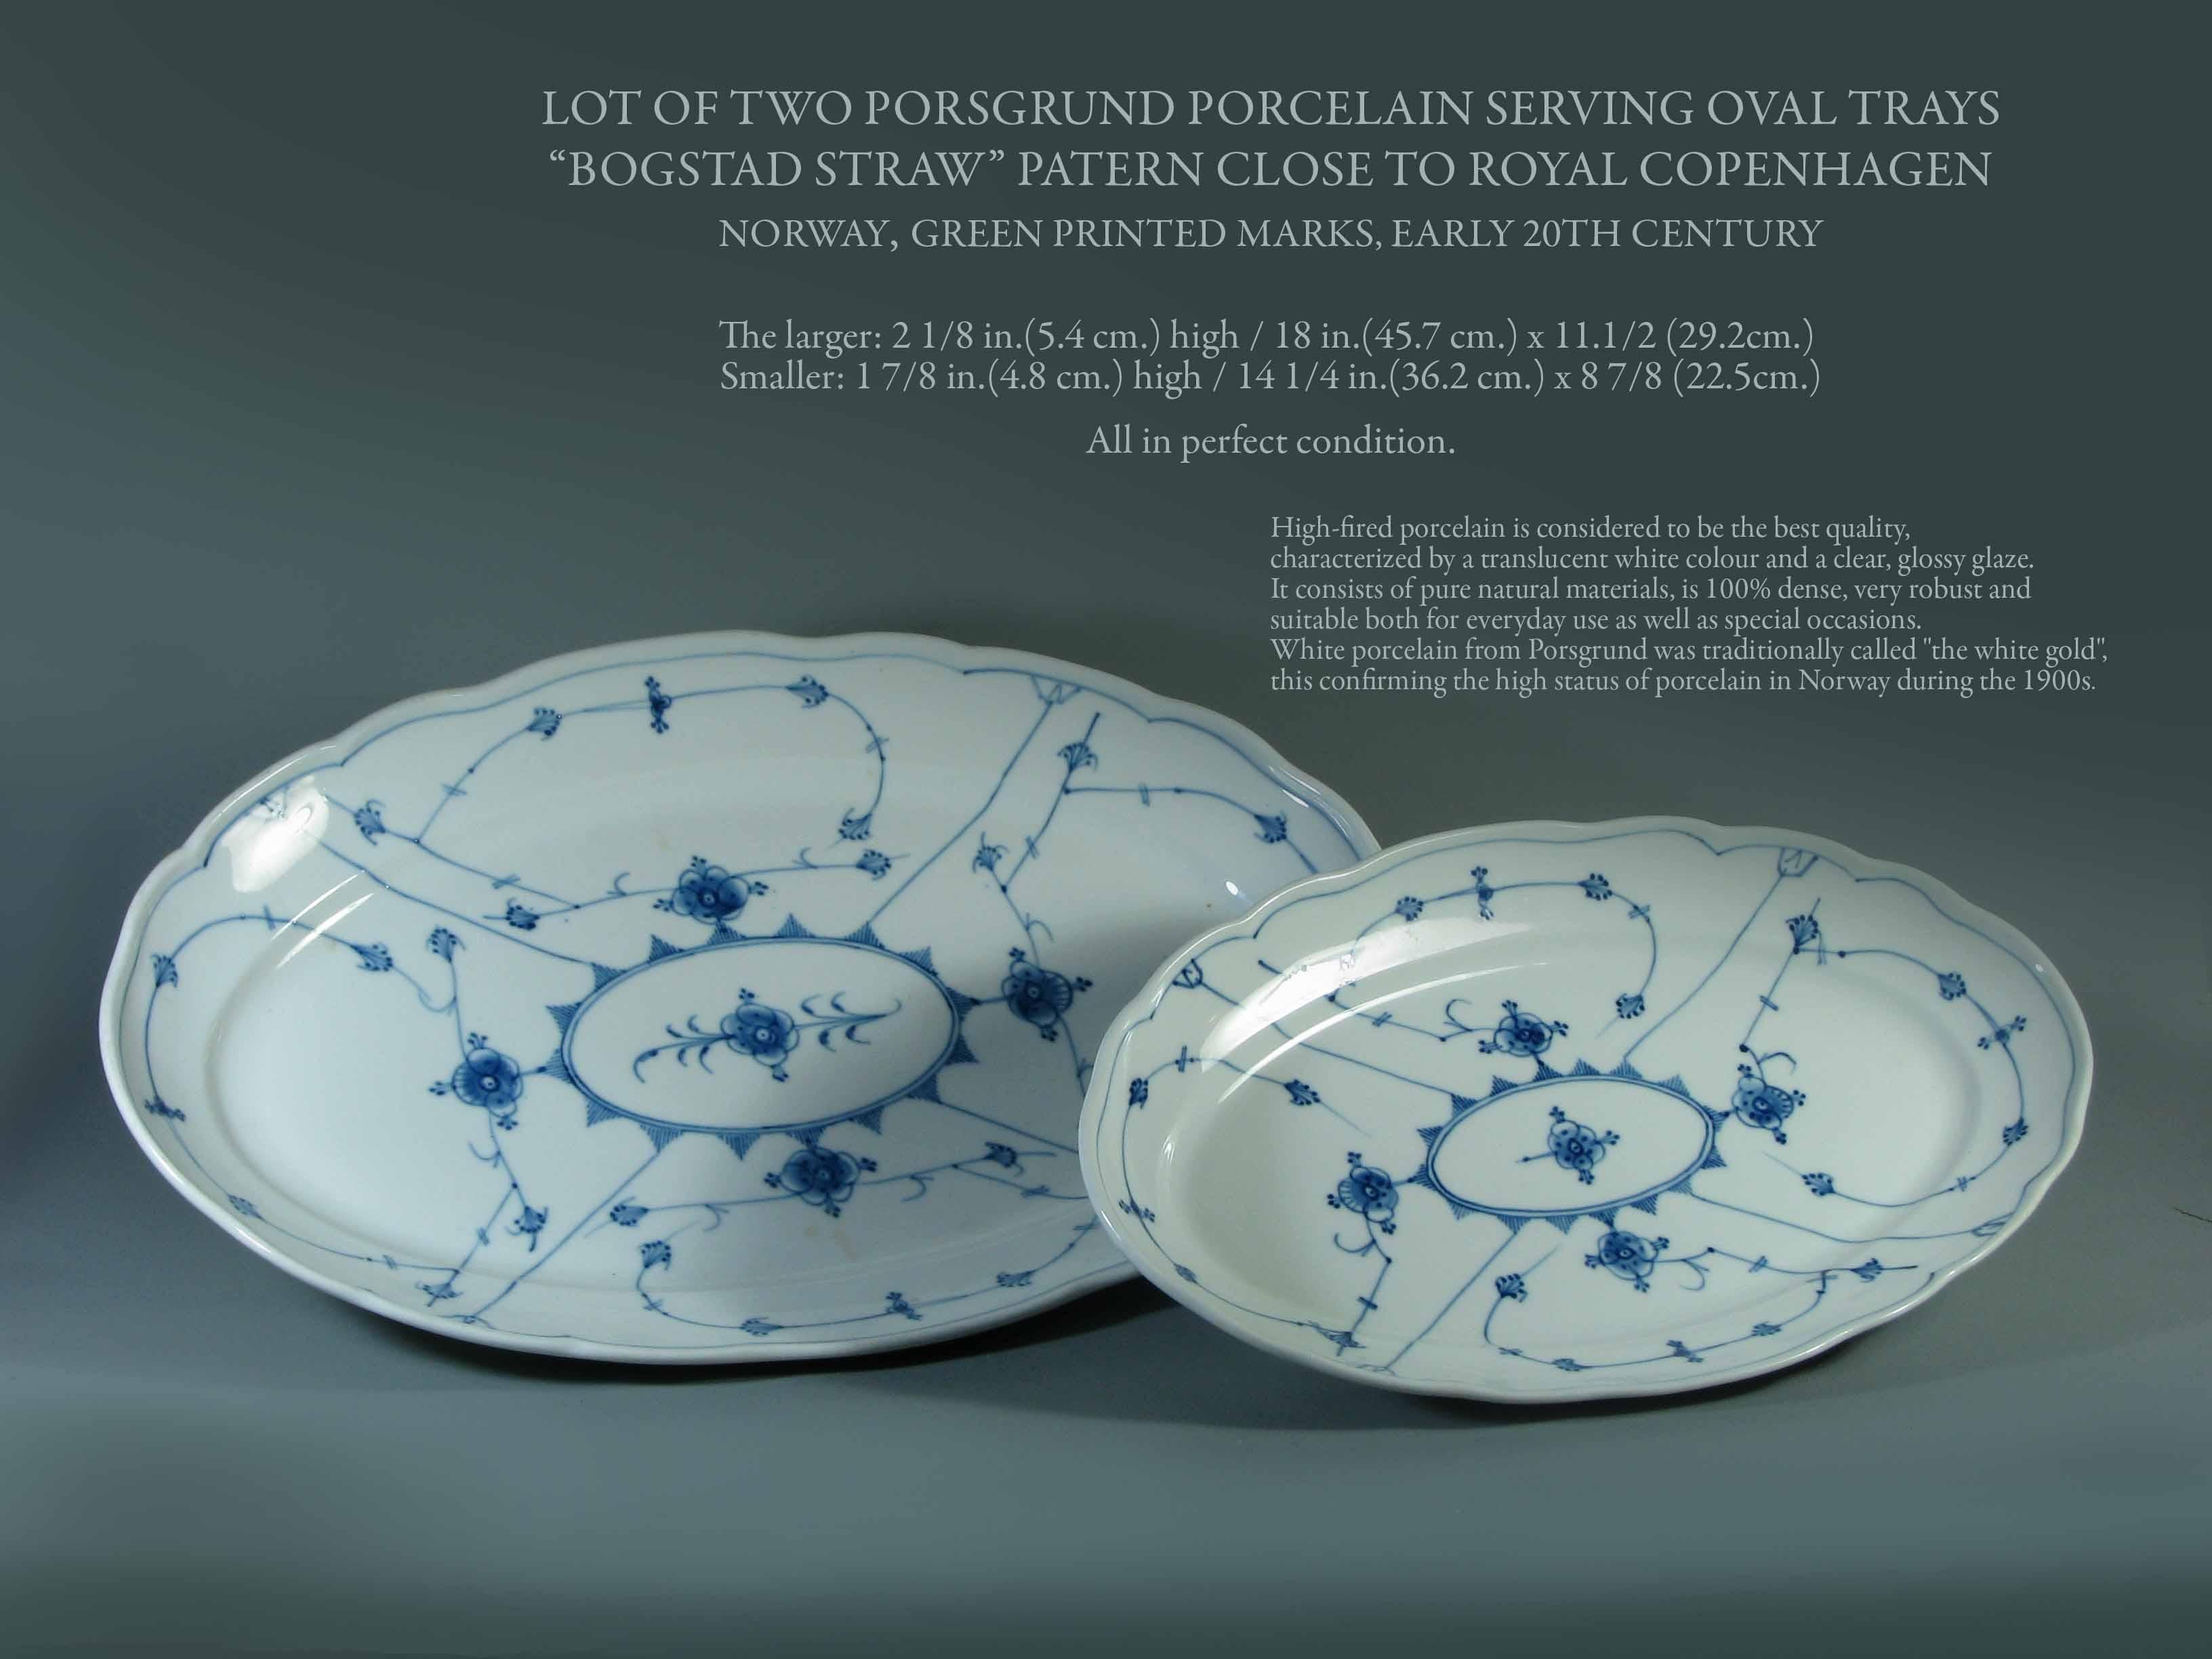 Lot of two Porsgrund porcelain serving oval trays
“Bogstad Straw” patern close to Royal Copenhagen
Norway, green printed marks, early 20th century

Measures: The larger: 2 1/8 in.(5.4 cm.) high / 18 in.(45.7 cm.) x 11.1/2 (29.2cm.) 
Smaller: 1